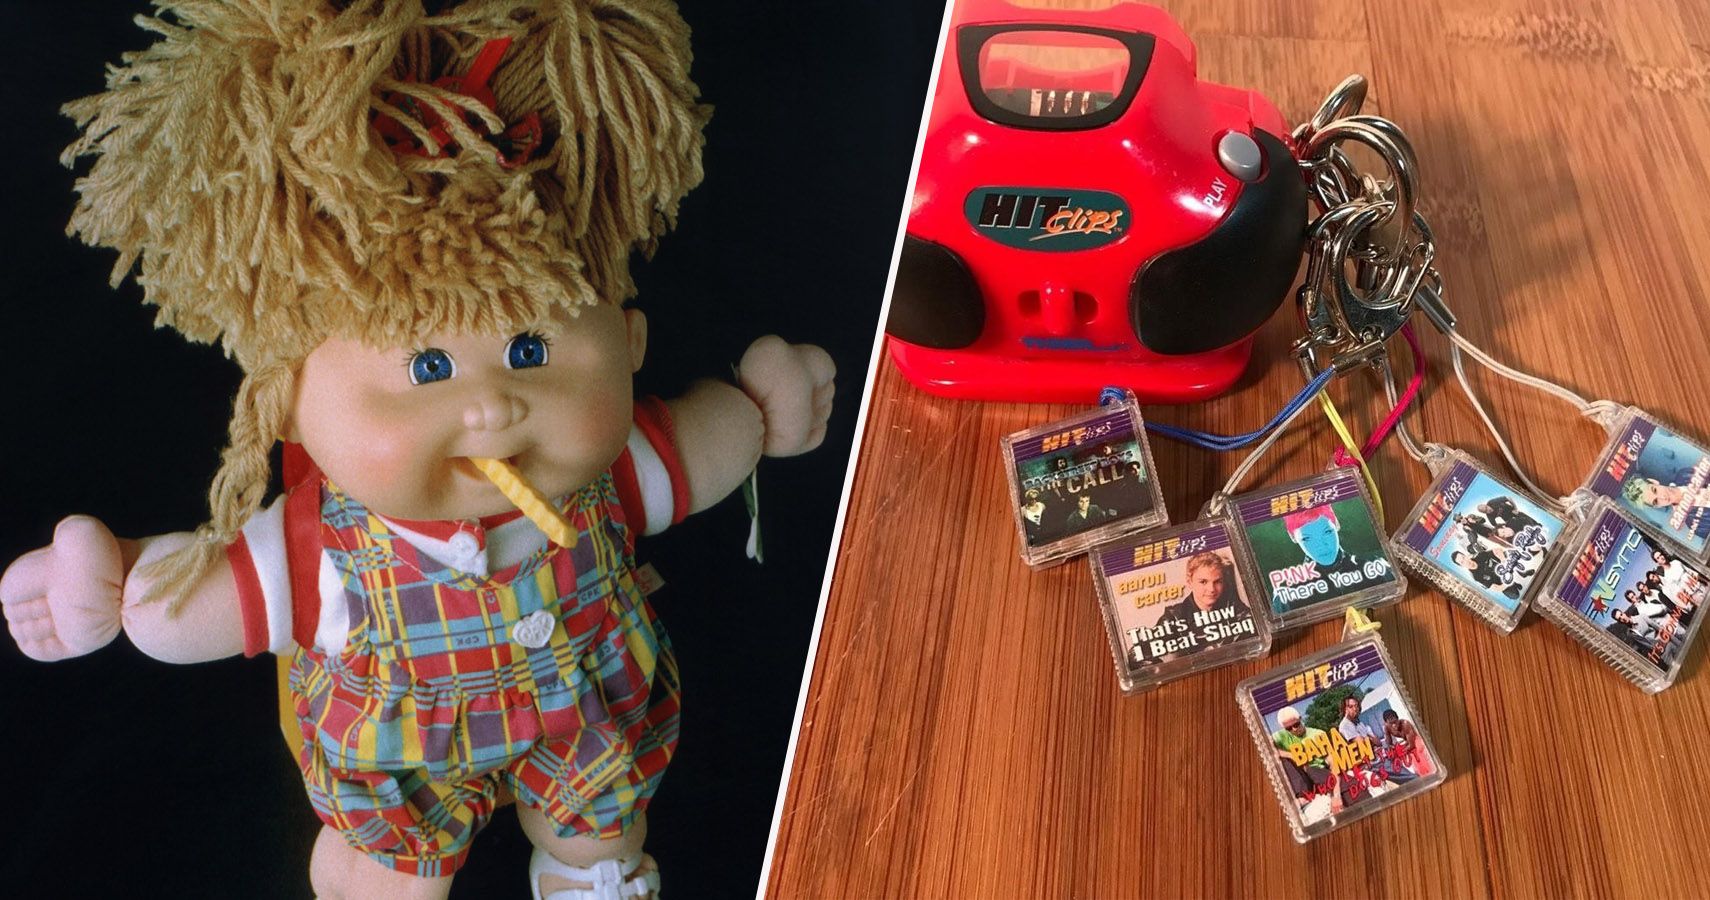 Unconventional Playtime: A Review of Weird Toys from the 90s